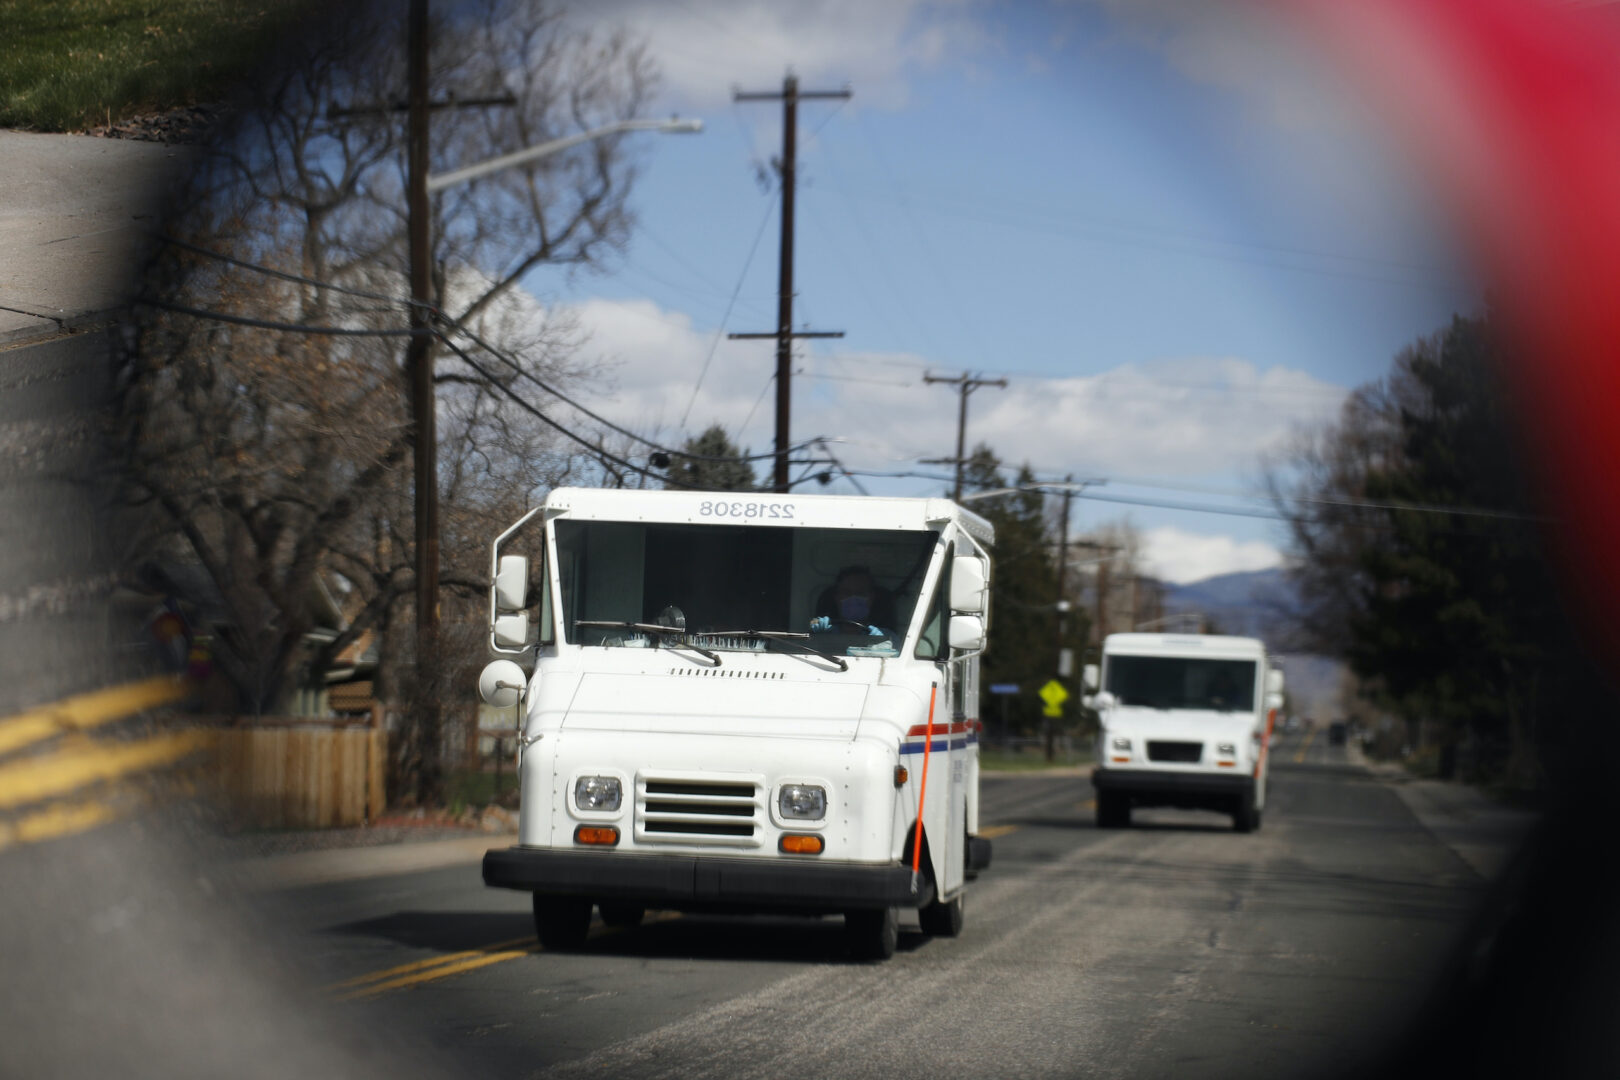 United States Post Office delivery trucks are reflected in the side mirror of a vehicle as postal delivers set off on their daily rounds  as a statewide stay-at-home order remains in effect in an effort to reduce the spread of the new coronavirus Tuesday, March 31, 2020, in  Arvada, Colo. The new coronavirus causes mild or moderate symptoms for most people, but for some, especially older adults and people with existing health problems, it can cause more severe illness or death. (AP Photo/David Zalubowski)